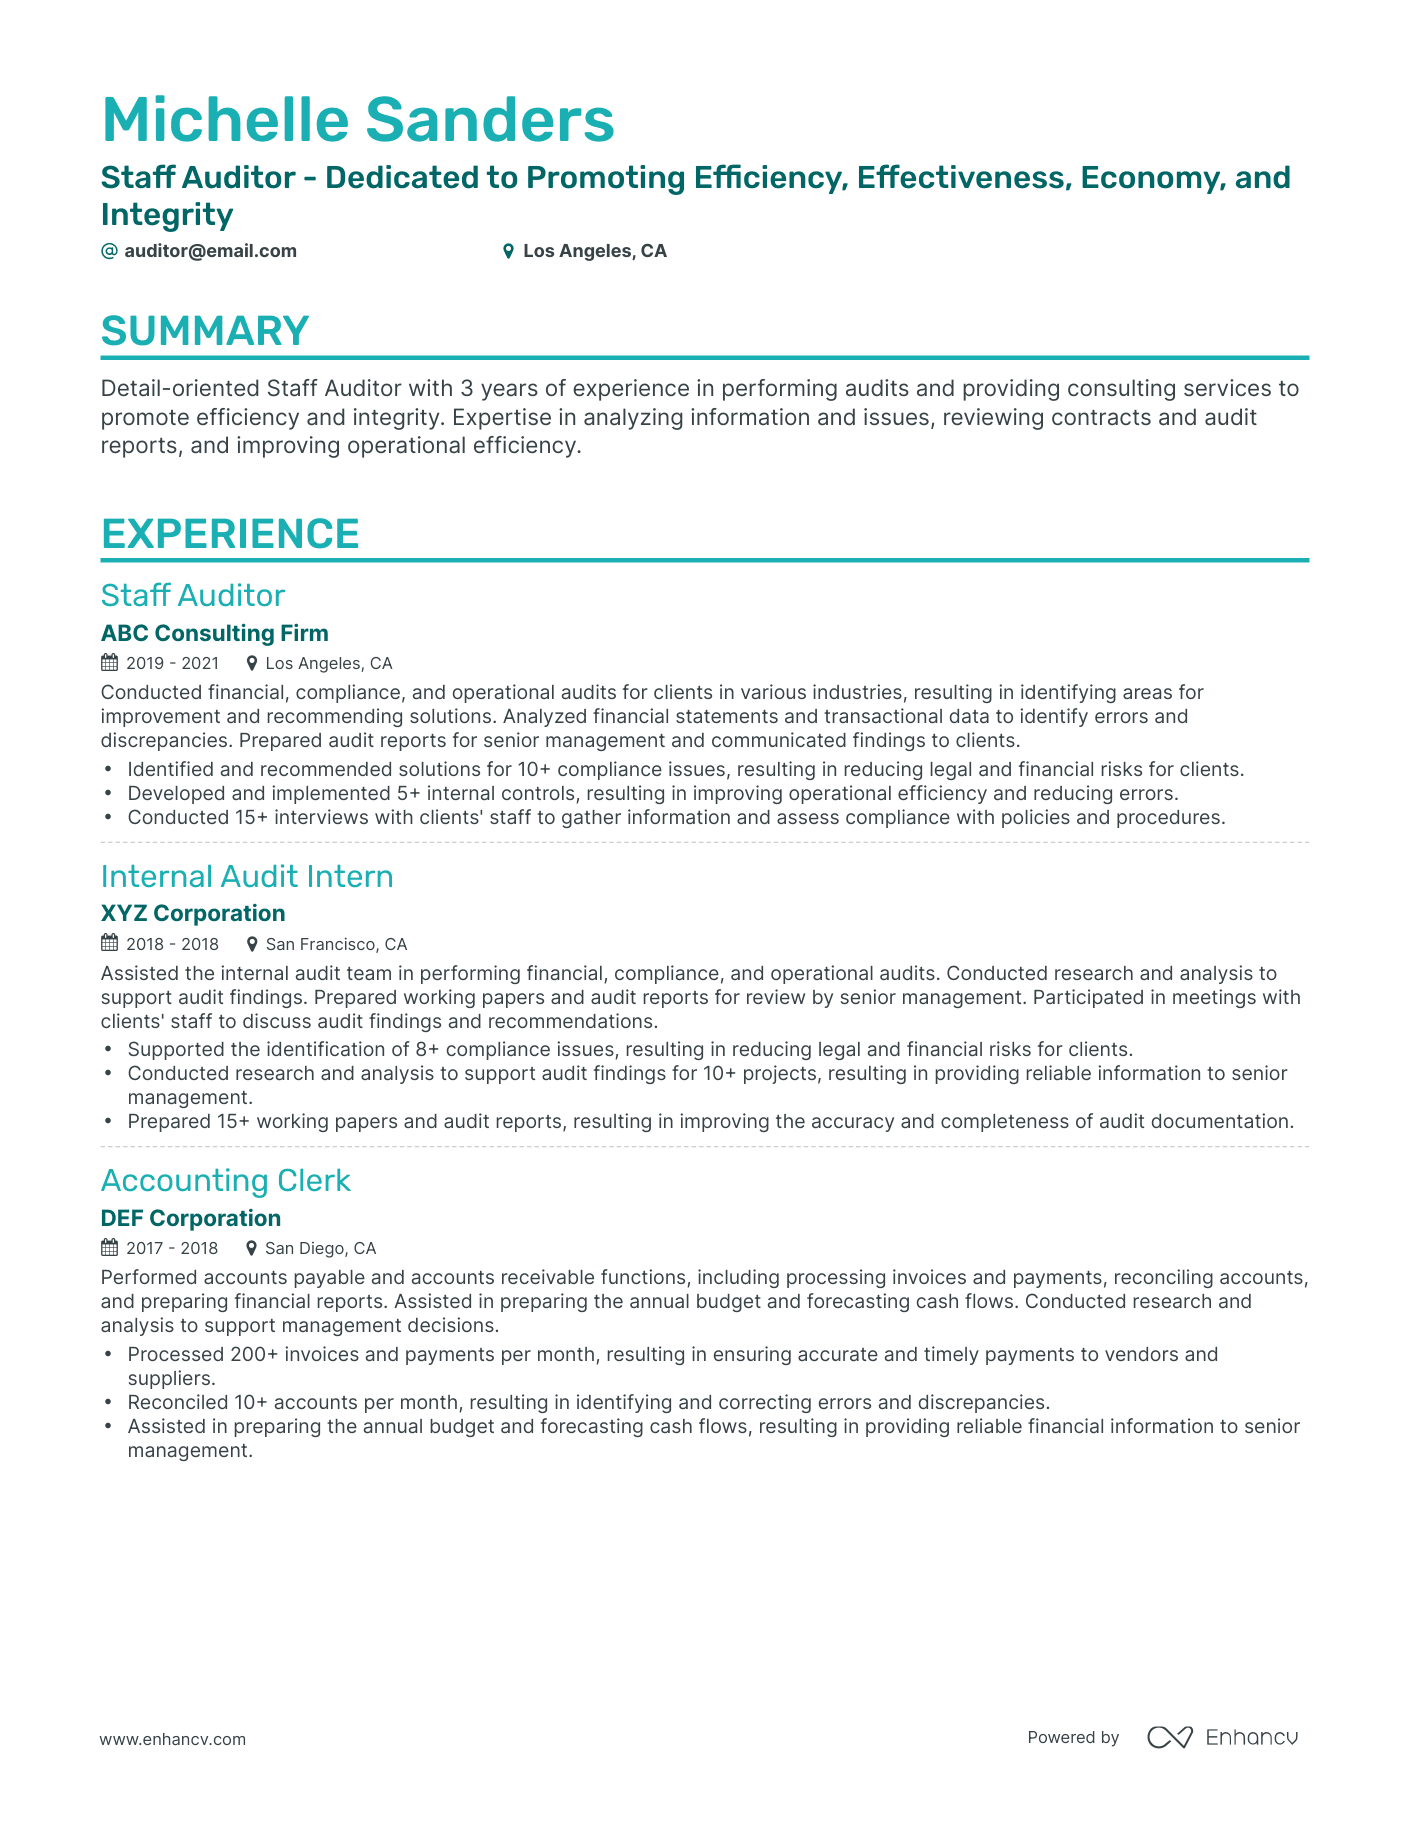 Classic Staff Auditor Resume Template